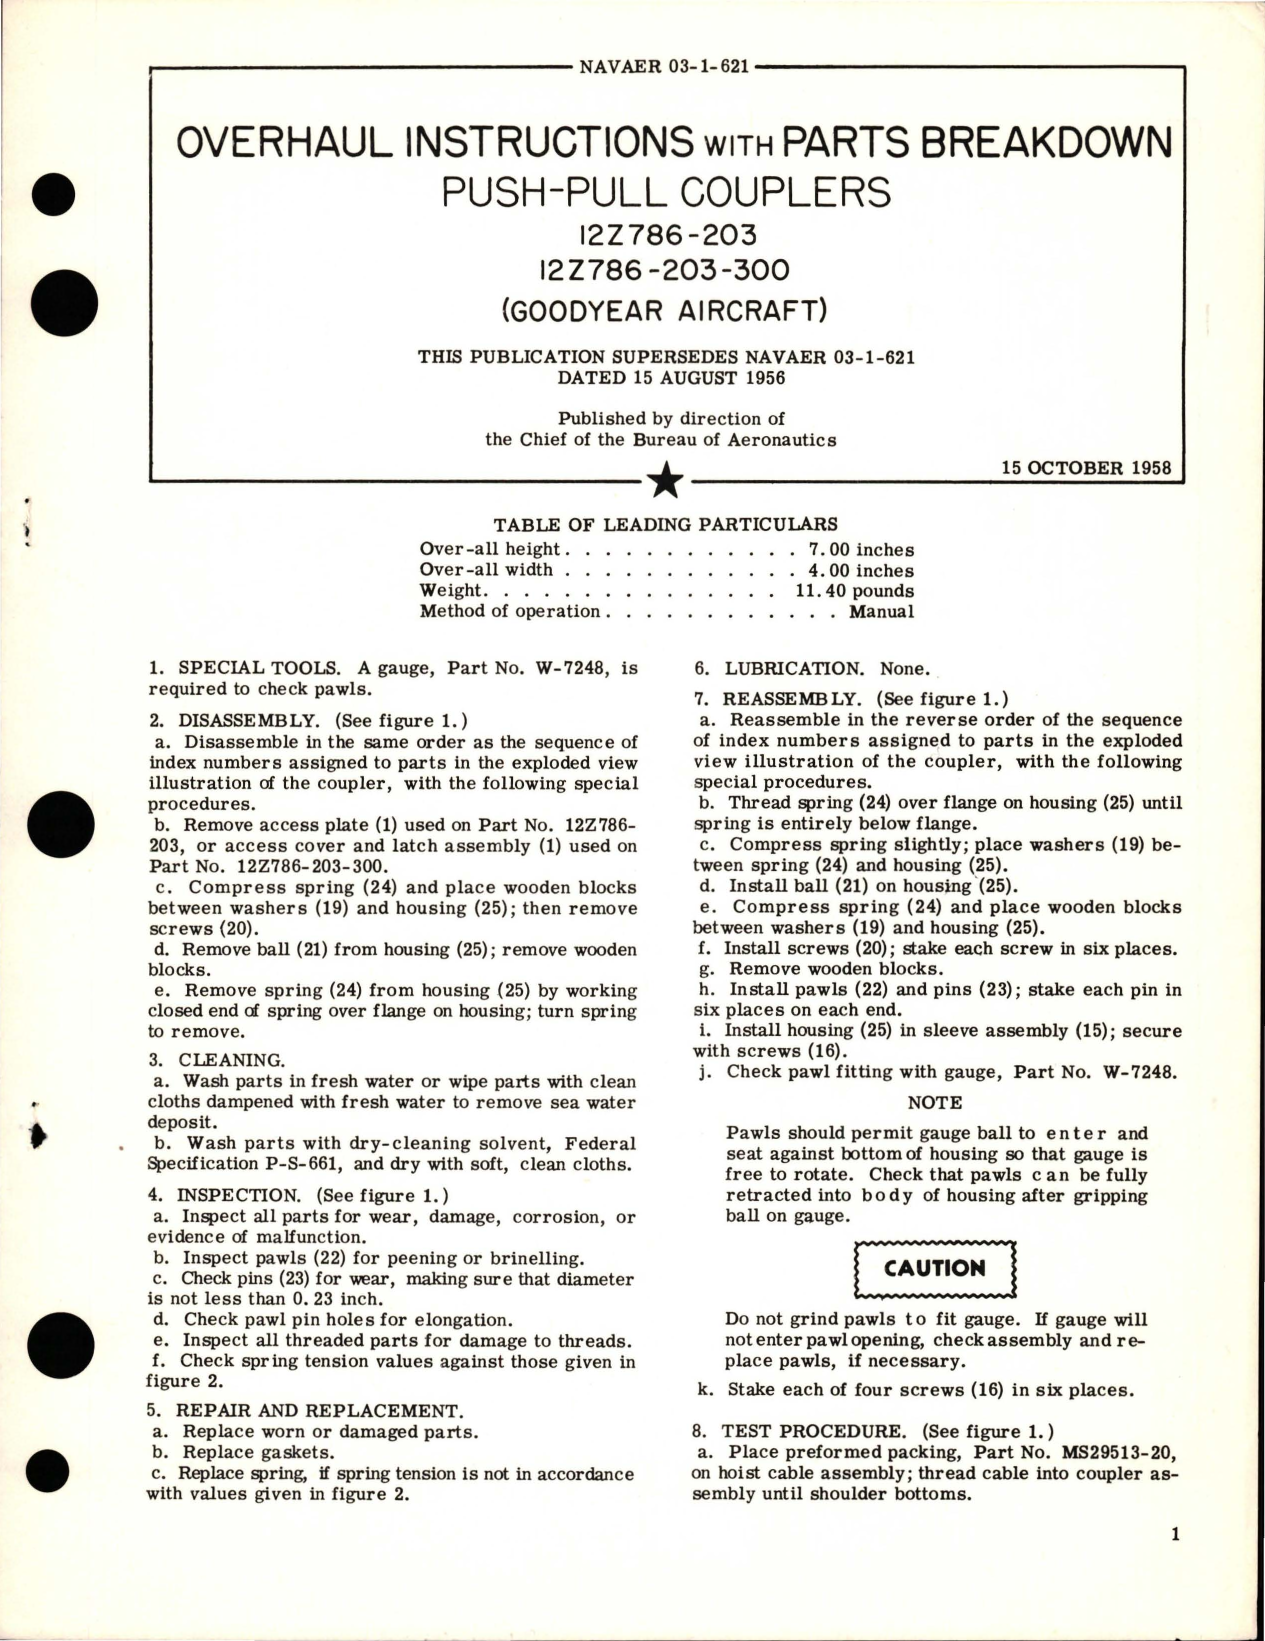 Sample page 1 from AirCorps Library document: Overhaul Instructions with Parts Breakdown for Push-Pull Couplers - 12Z786-203 and 12Z786-203-300